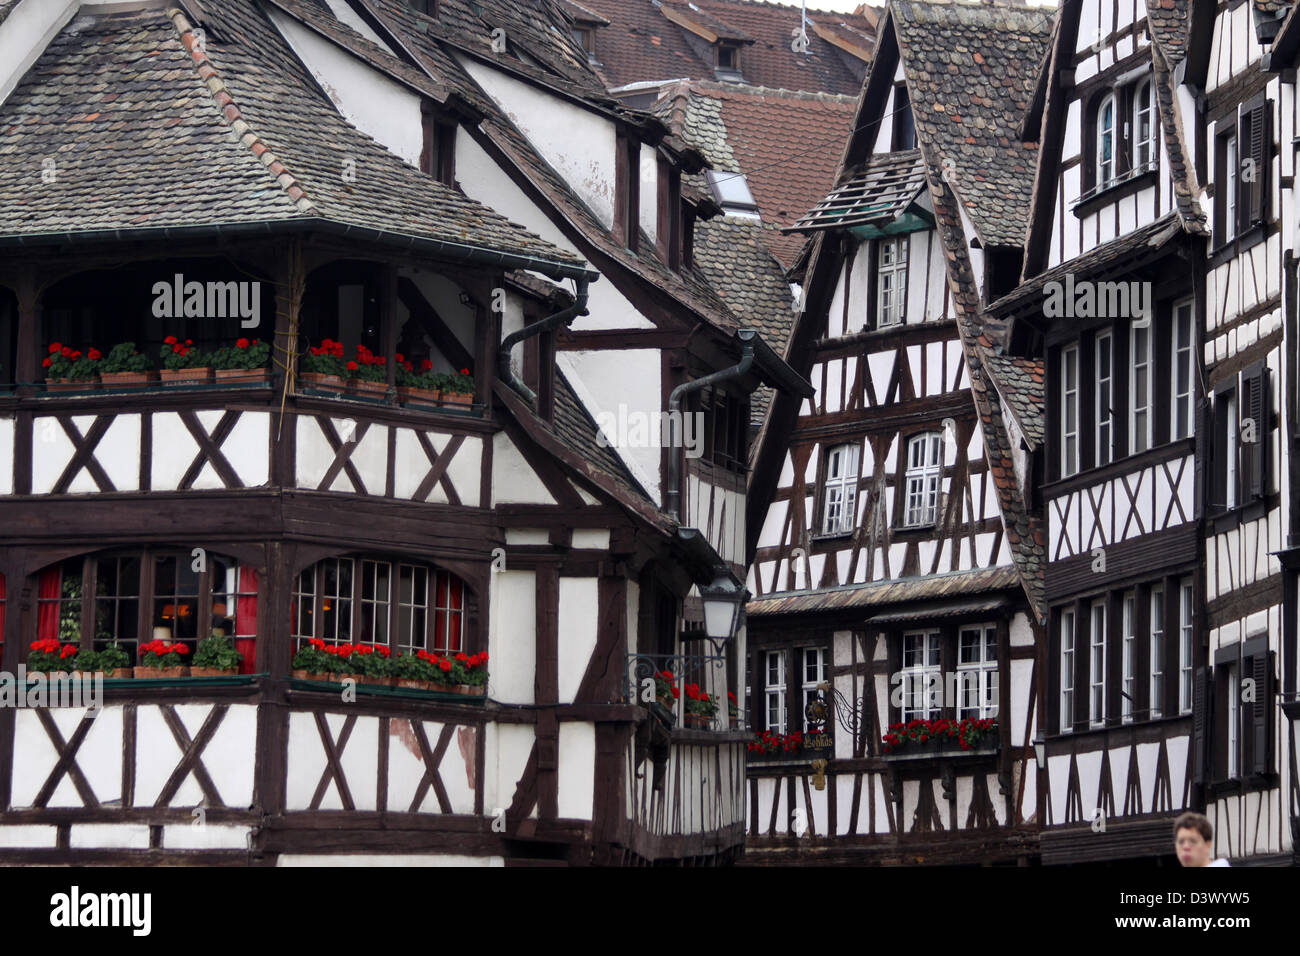 Black and white half-timbered houses in the old town of Strasbourg, Alsace, France Stock Photo